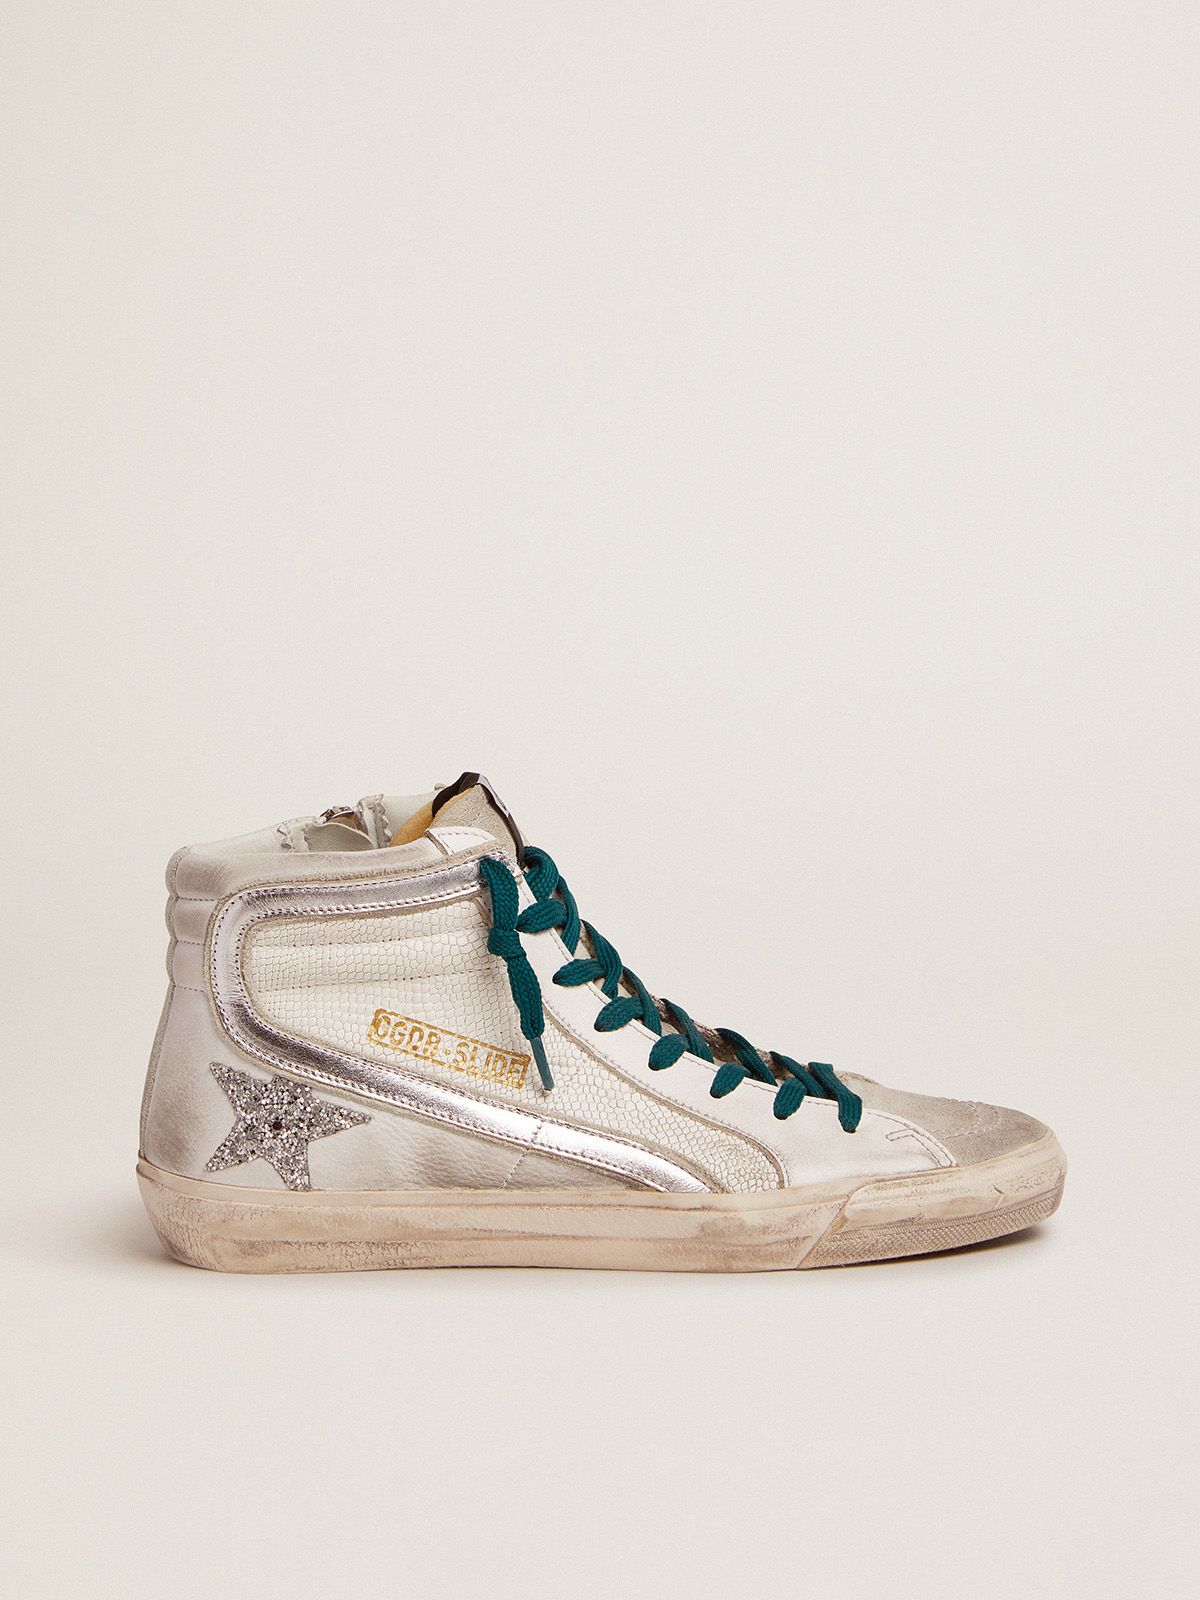 golden goose snake-print upper star leather with silver and Slide sneakers glitter